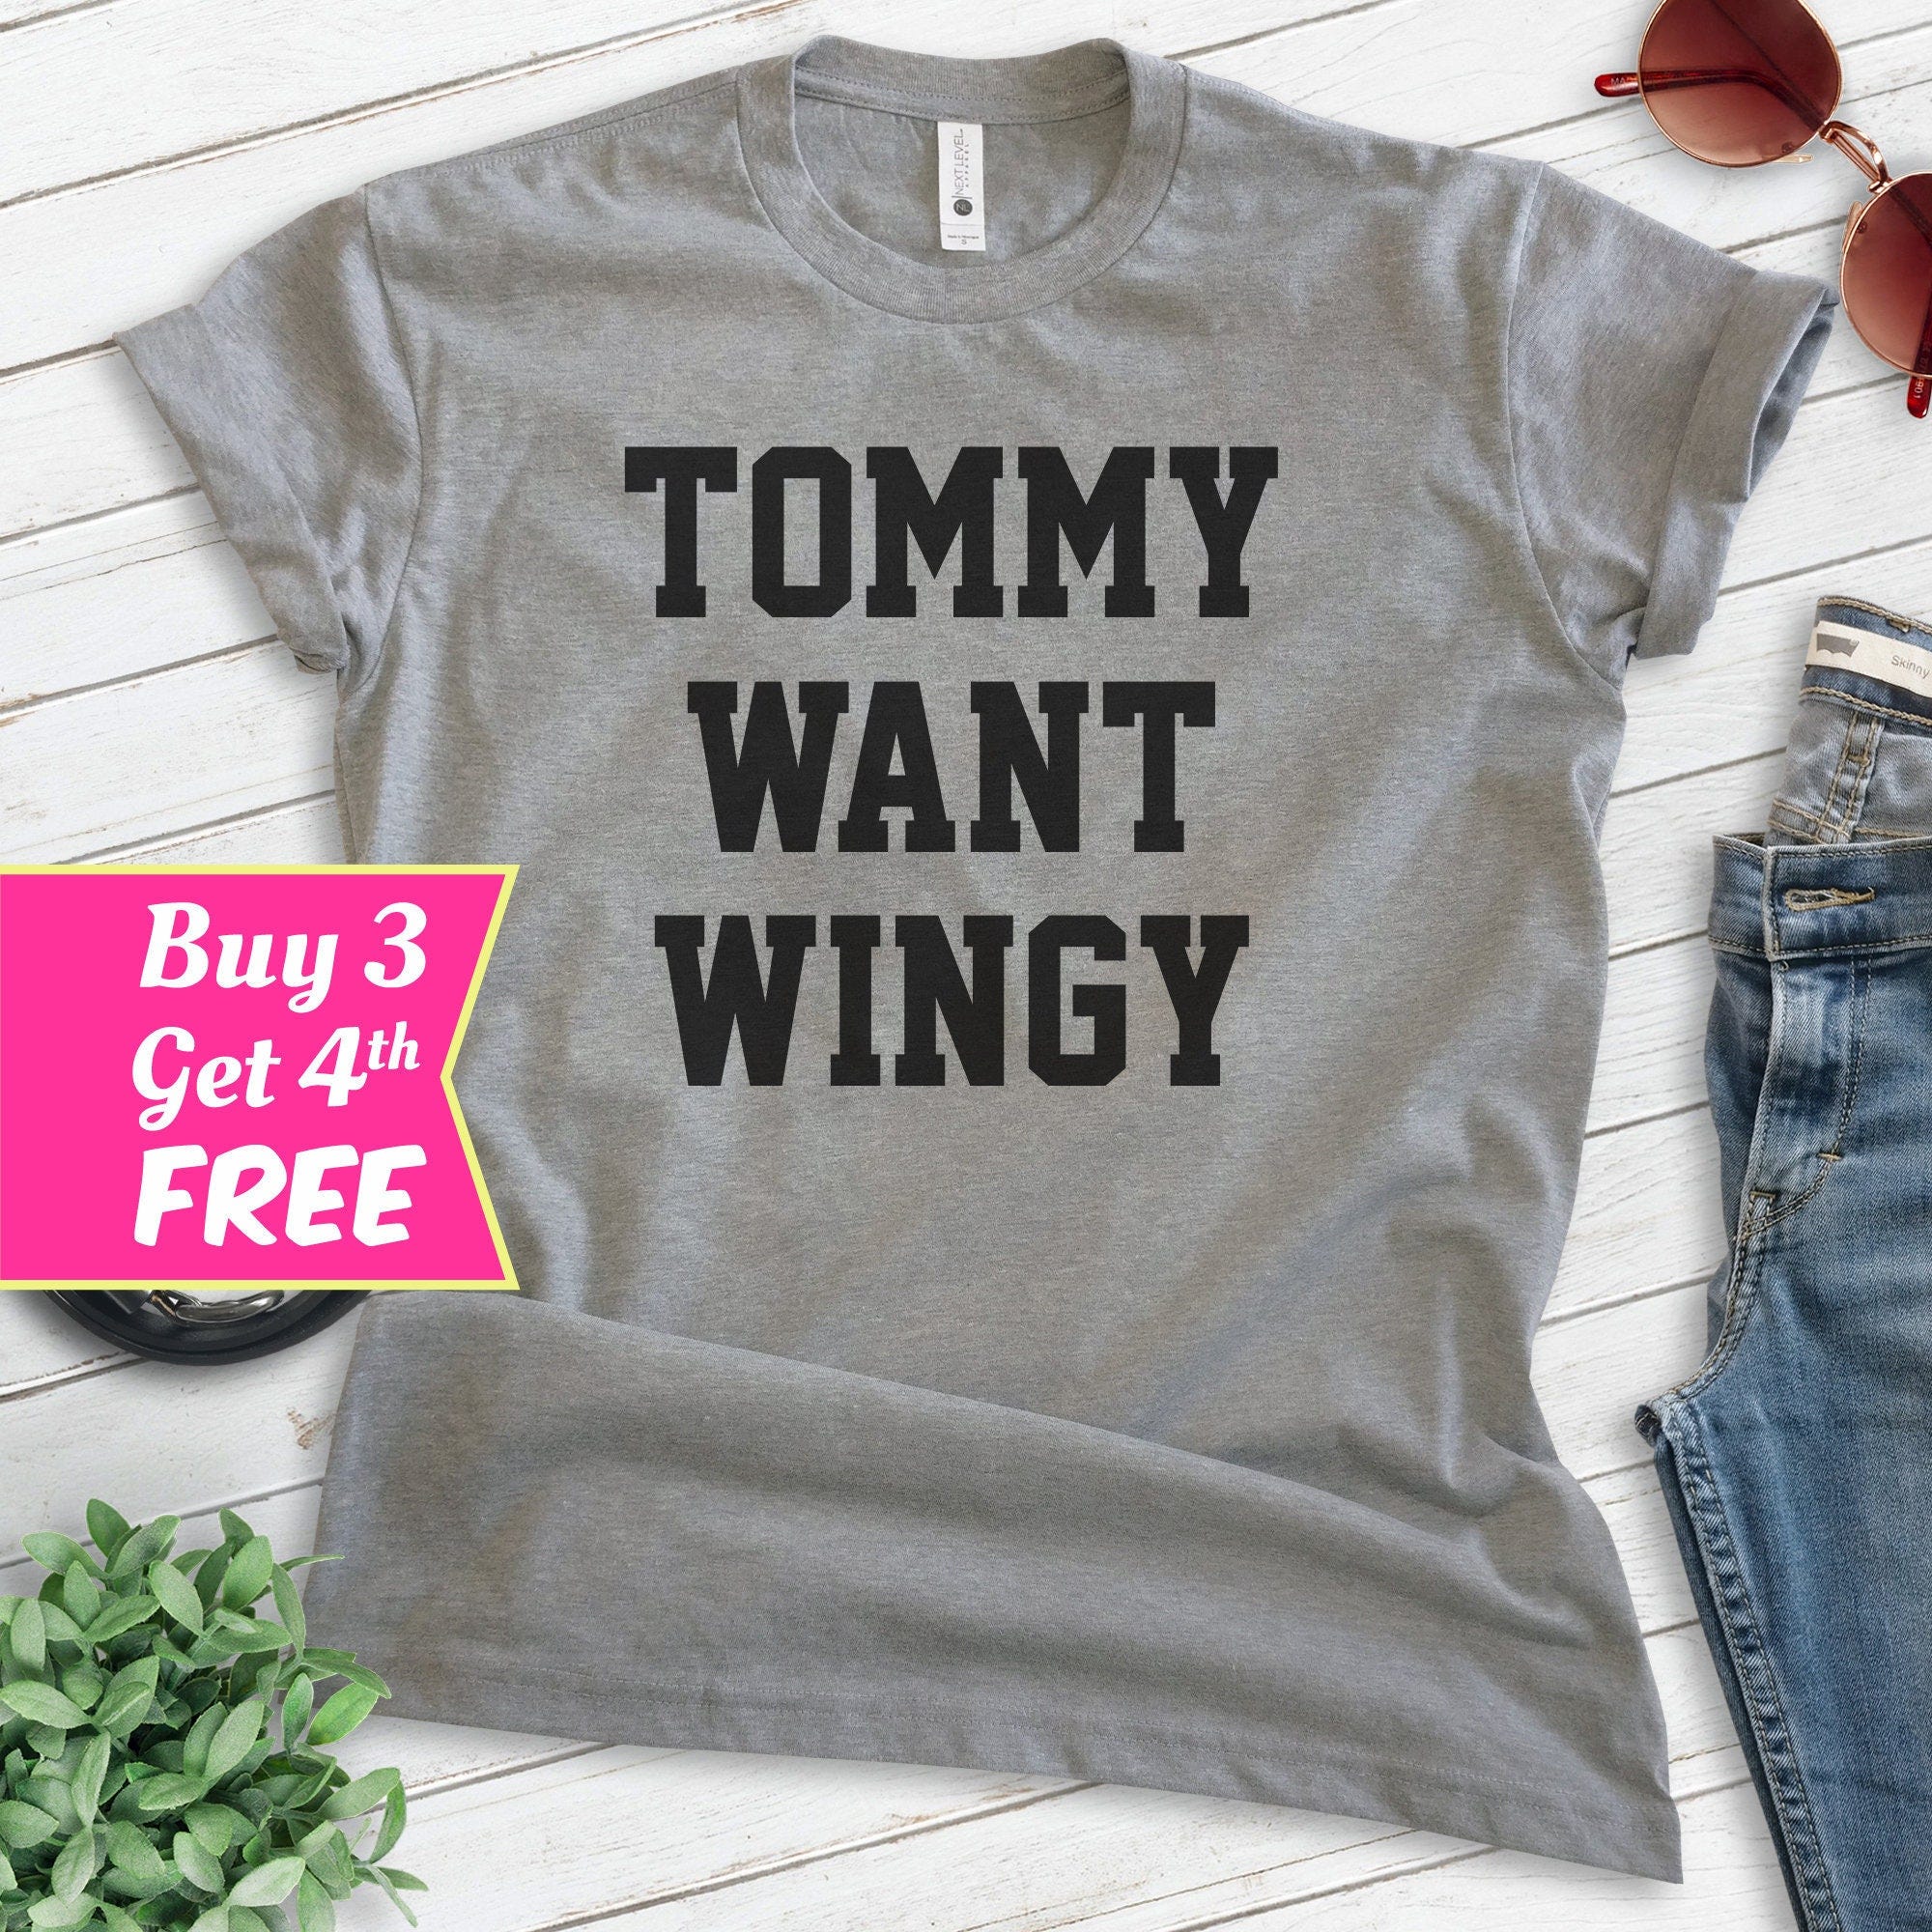 Tommy Want Wingy Shirt, Unisex T-shirt, Funny Saying Shirt, Funny Slogan Shirt, Wings Shirt, Movie Quote Shirt